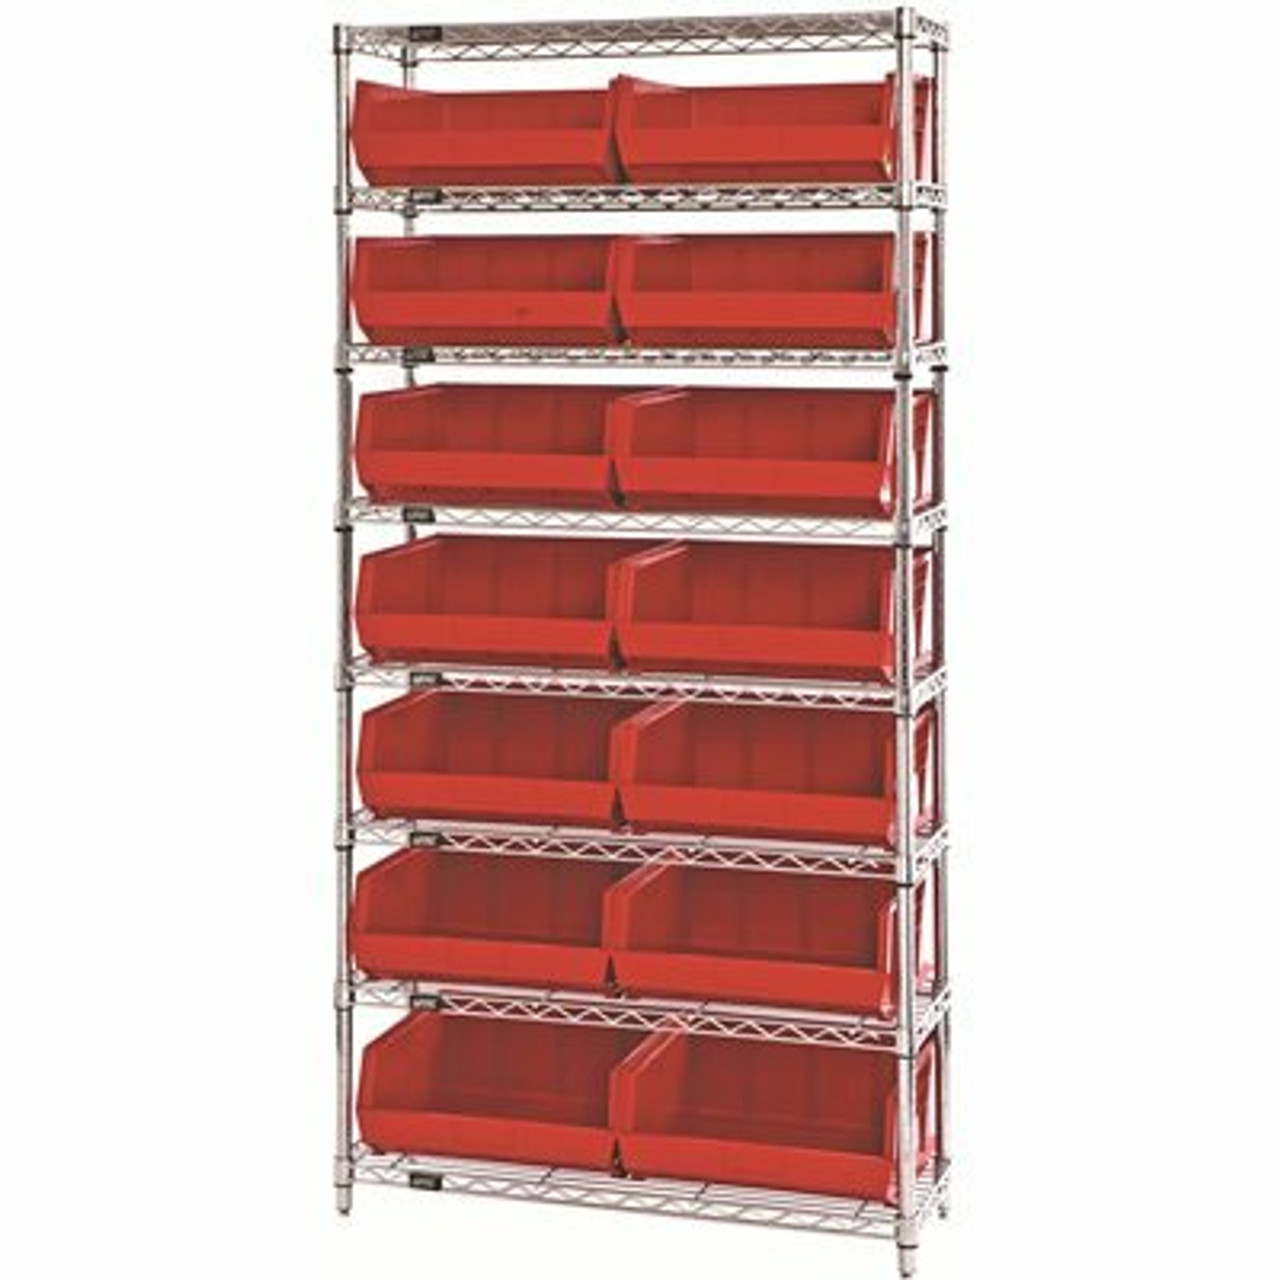 Quantum Storage Systems Giant Open Hopper 36 In. X 14 In. X 74 In. Wire Chrome Heavy Duty 8-Tier Industrial Shelving Unit - 308241564